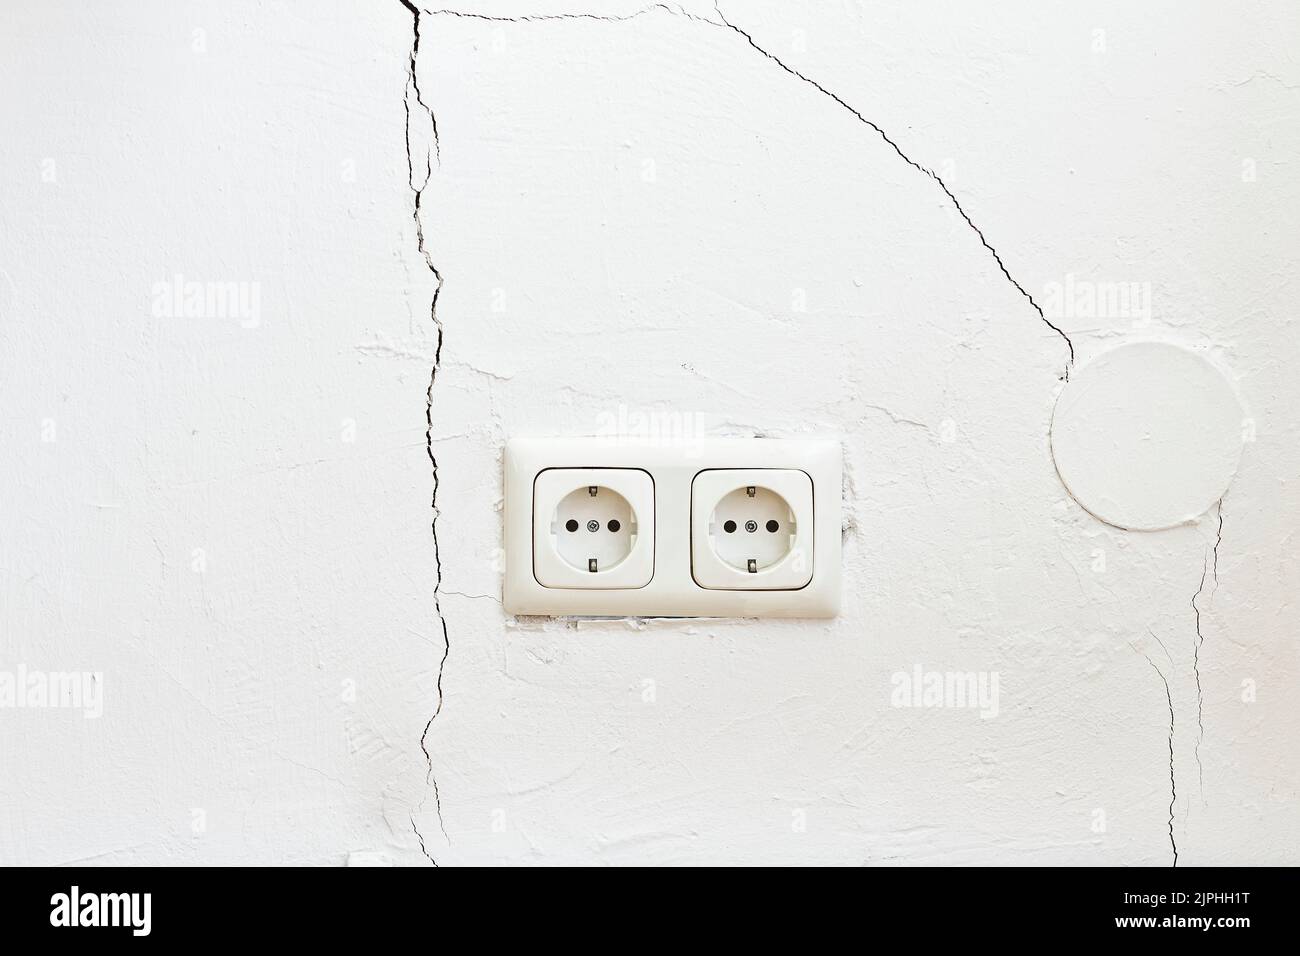 Damaged property: white wall with cracks or rips and two european plug sockets or outlets. Refurbishment of real estate concept. Stock Photo